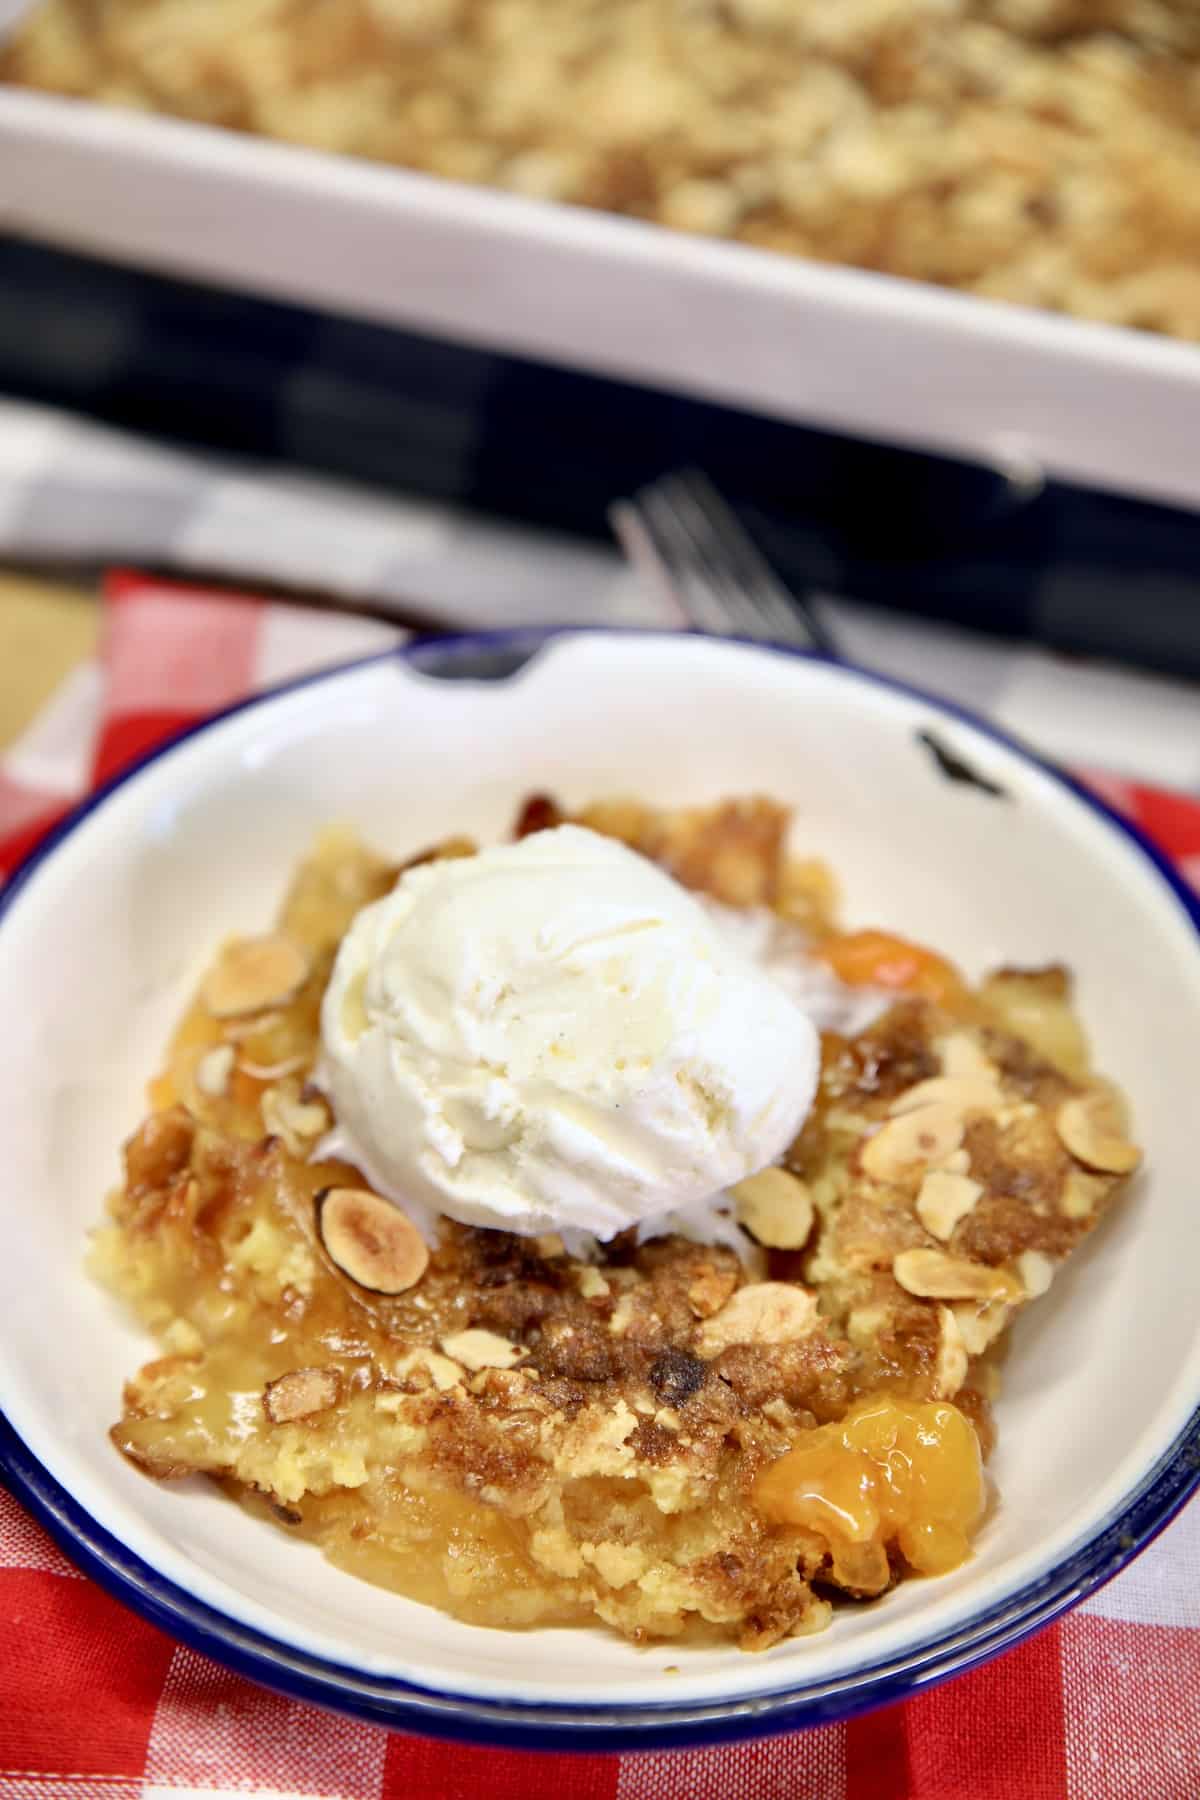 Apricot dump cake with ice cream on a plate.